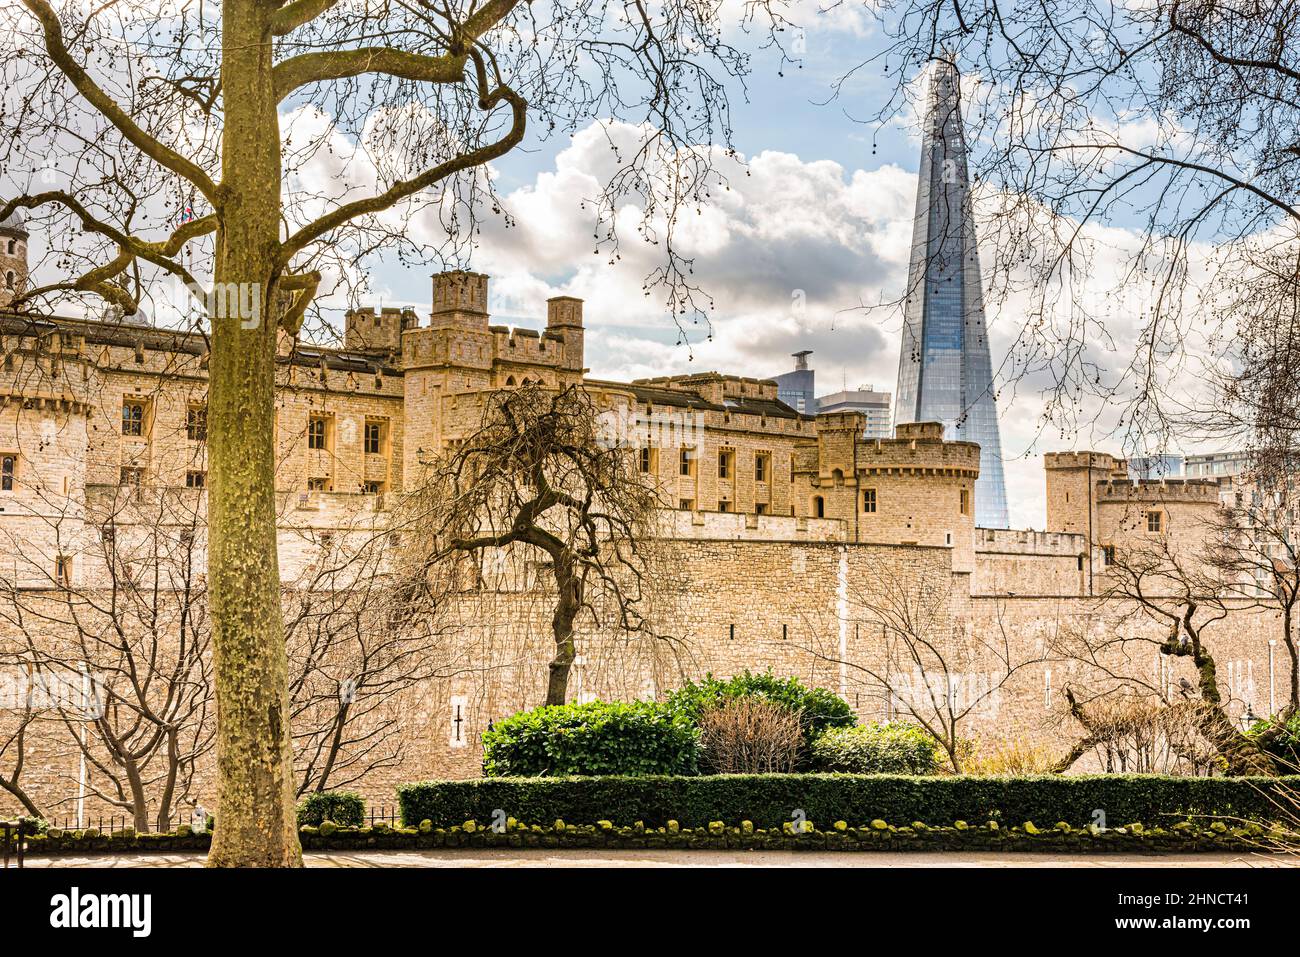 The Tower of London with The Shard glass tower in the background. The old and the new. Changes in architecture Stock Photo